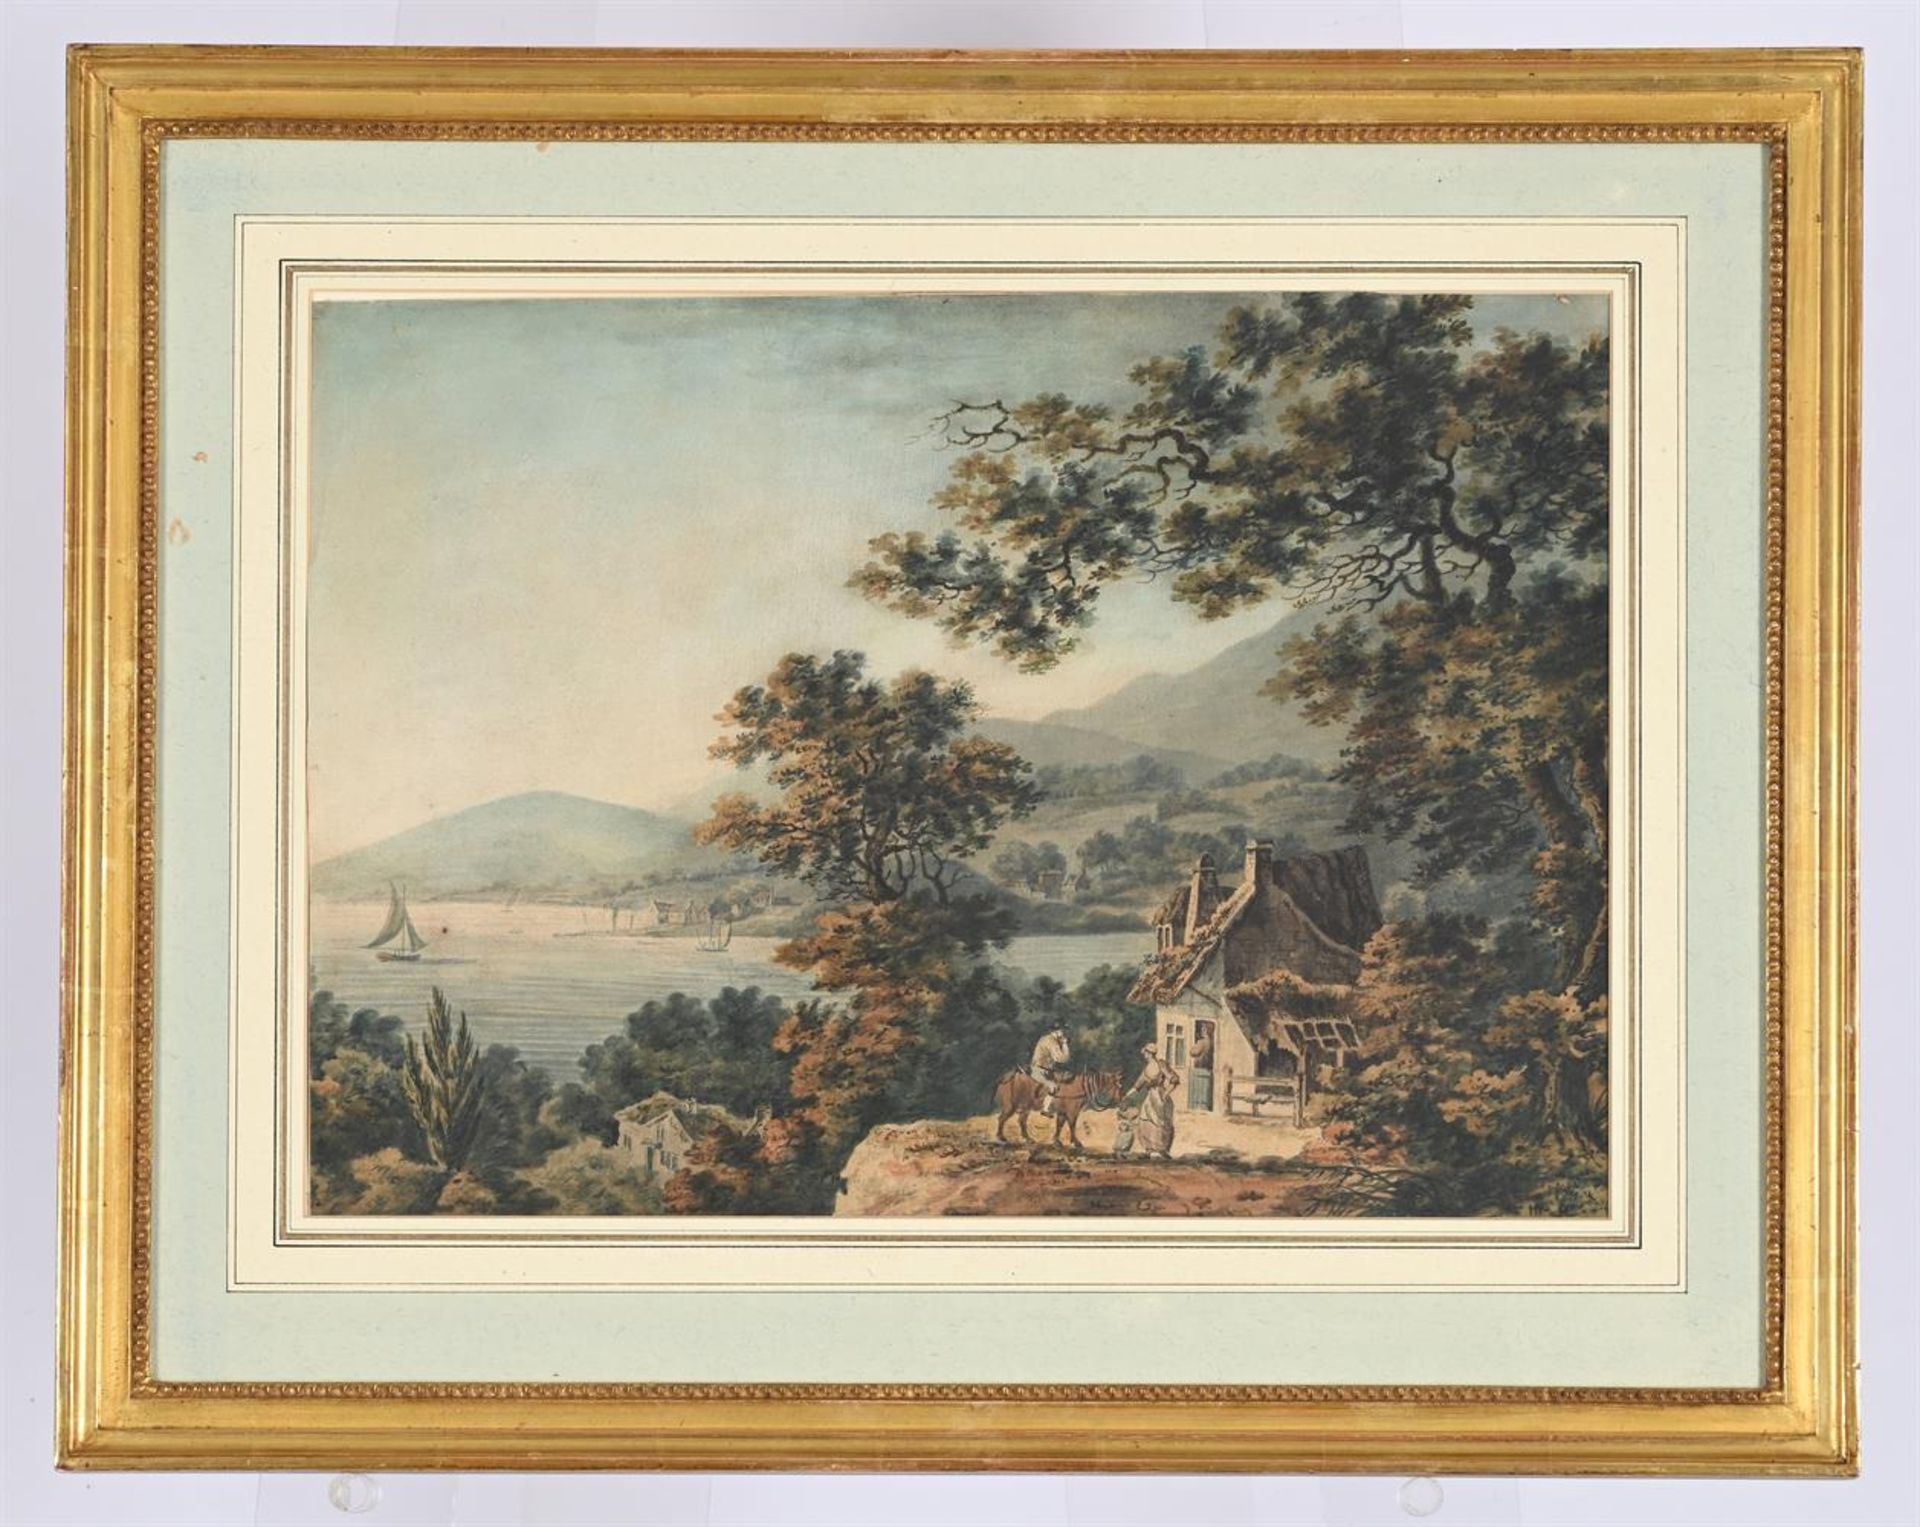 ENGLISH SCHOOL (C. 1800), COTTAGE LANDSCAPE WITH AN ESTUARY BEYOND - Image 2 of 2